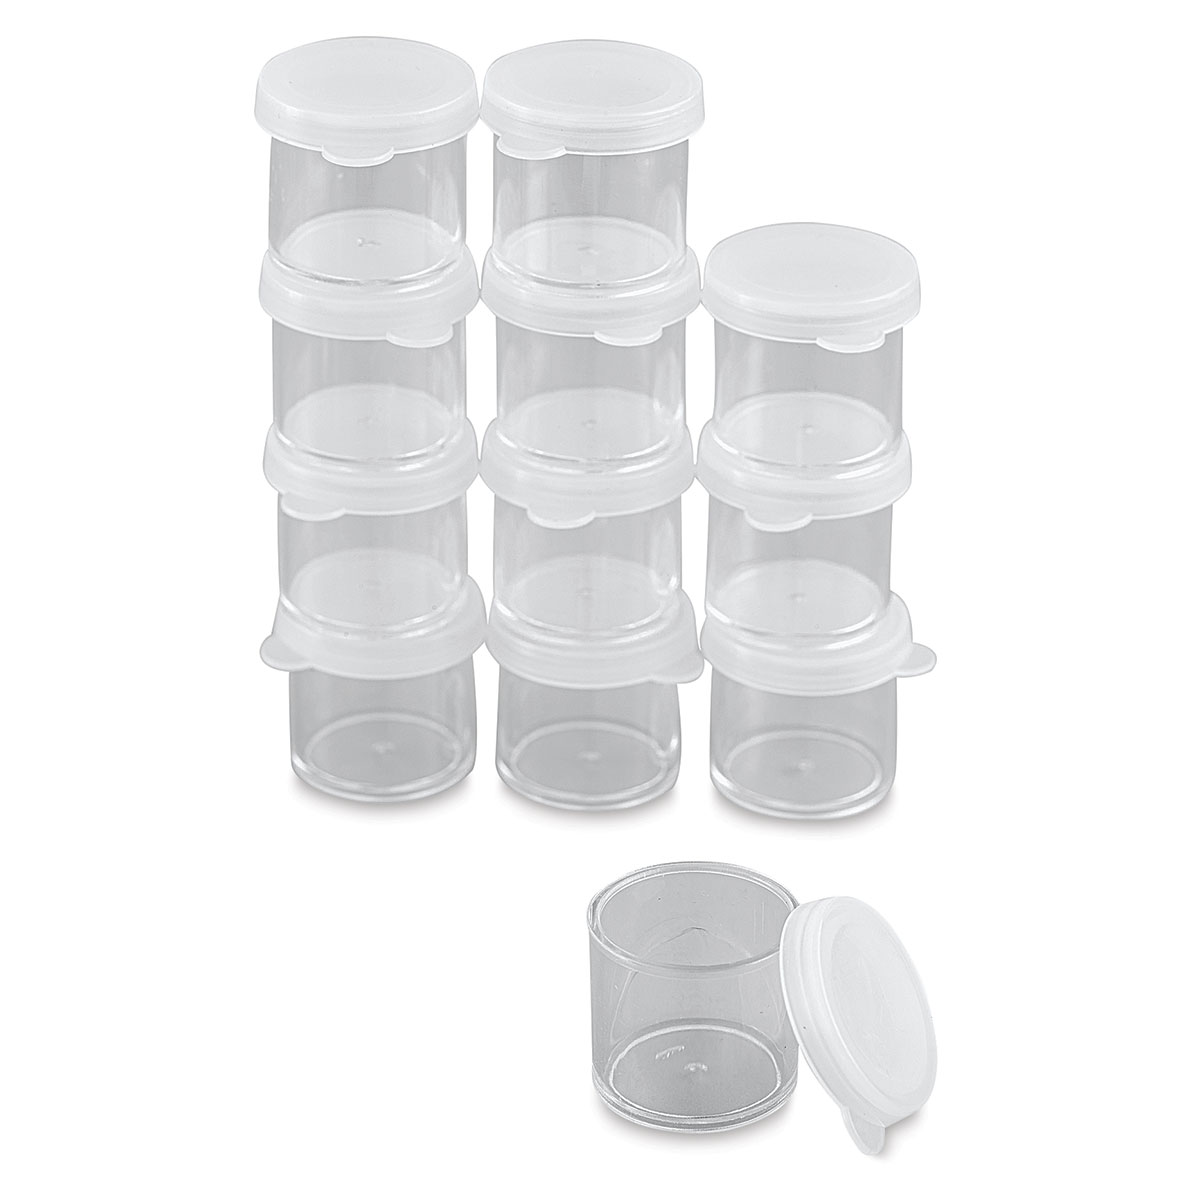 DecorRack 12 Plastic Mini Containers with Lids, 1oz, Macao